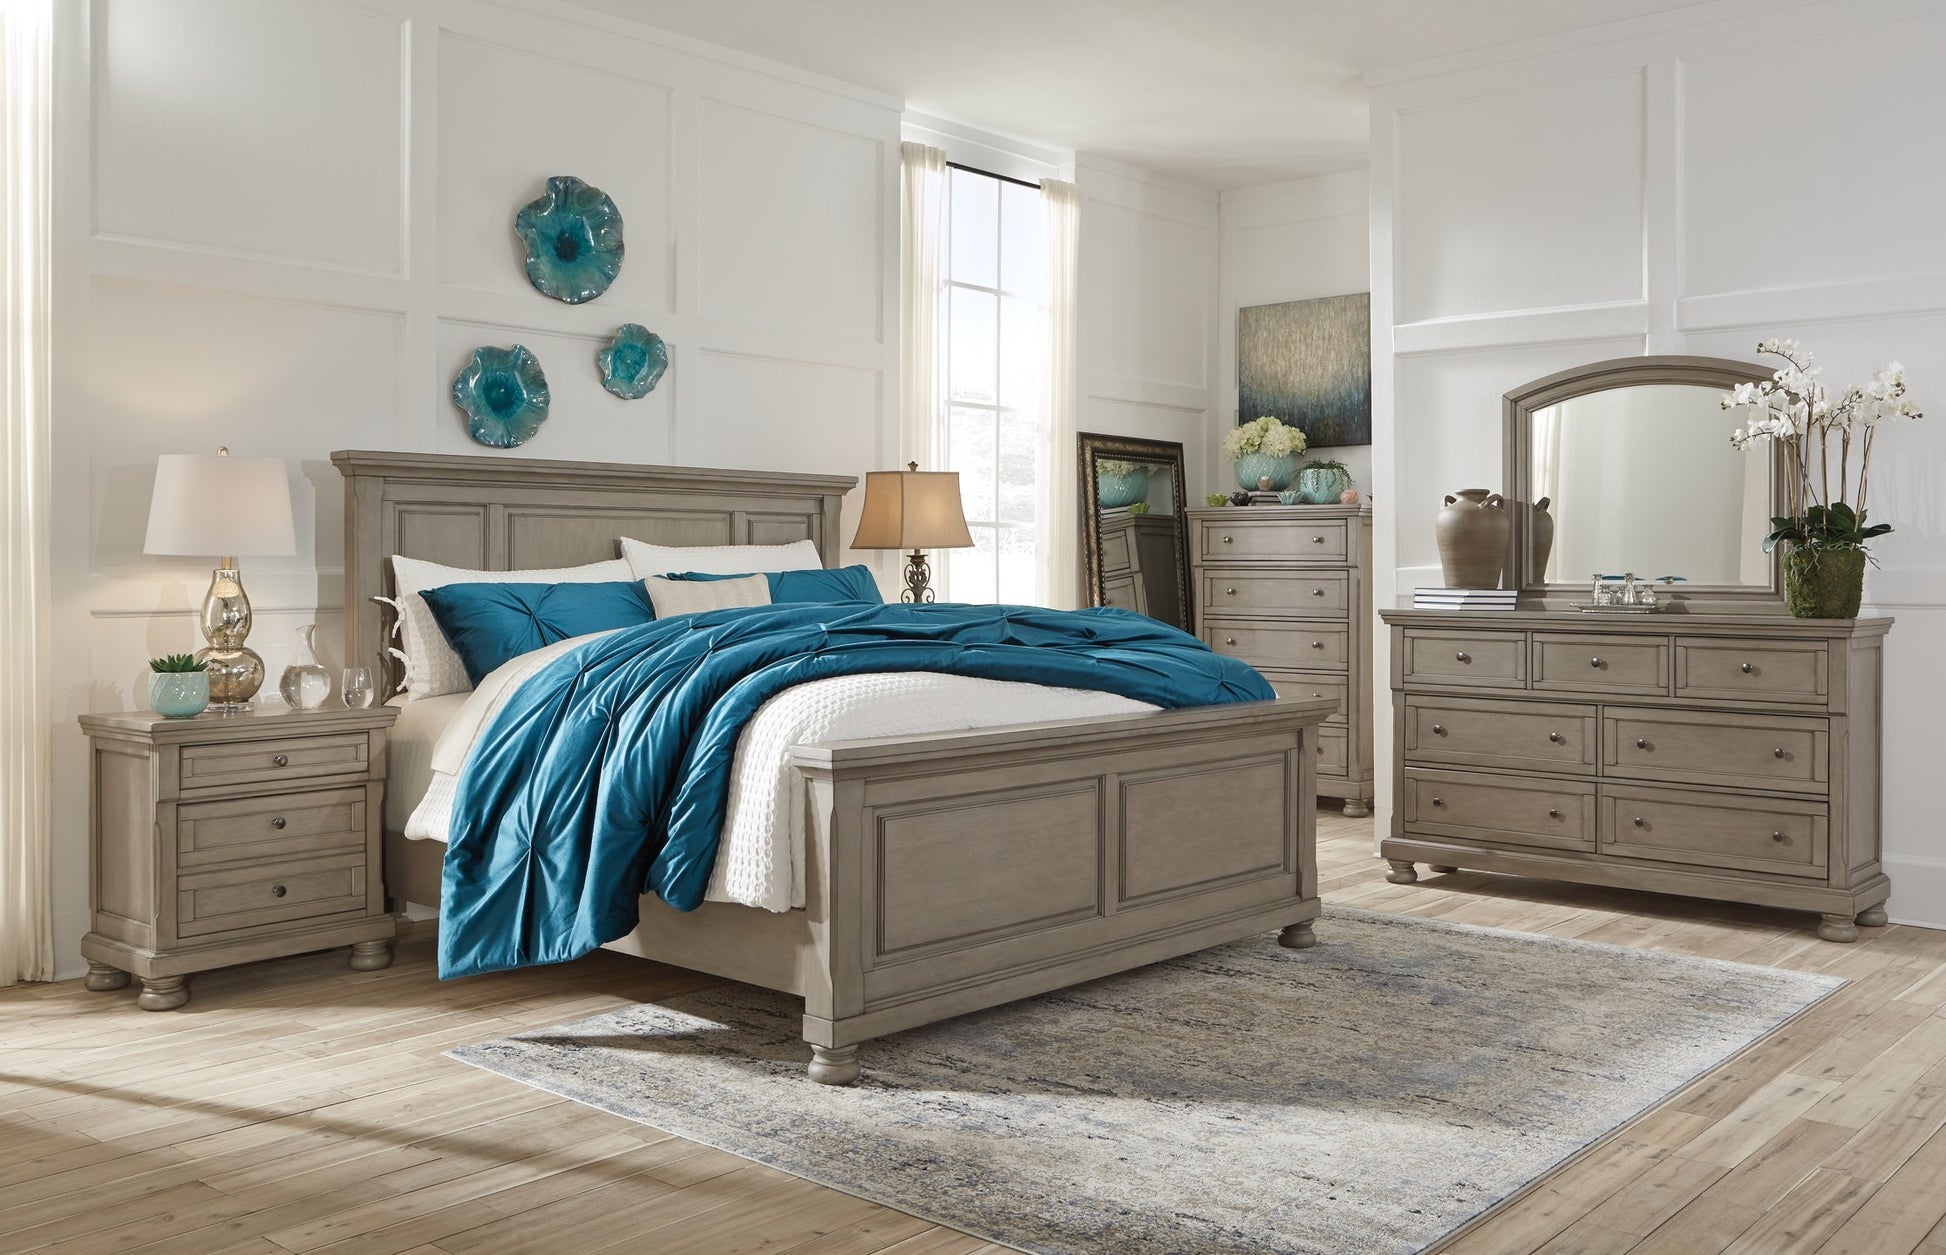 Lettner Queen Panel Bed with Dresser at Walker Mattress and Furniture Locations in Cedar Park and Belton TX.